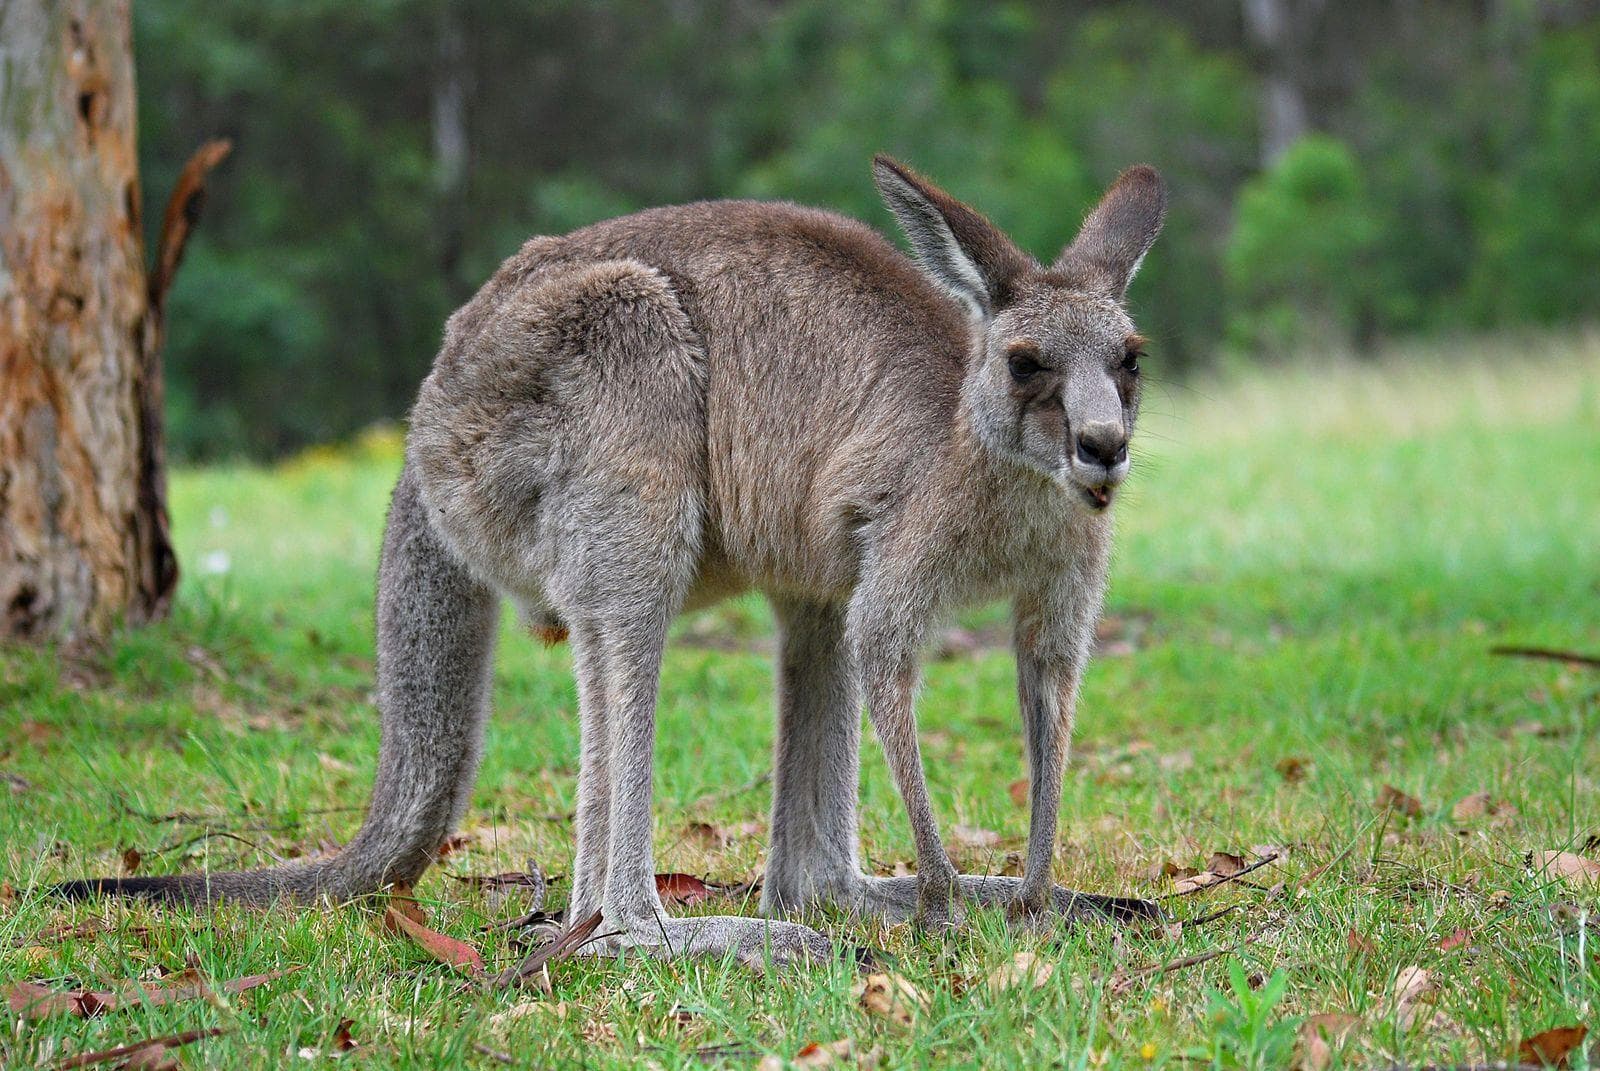 Random Fascinating Facts You Probably Never Learned About Marsupials